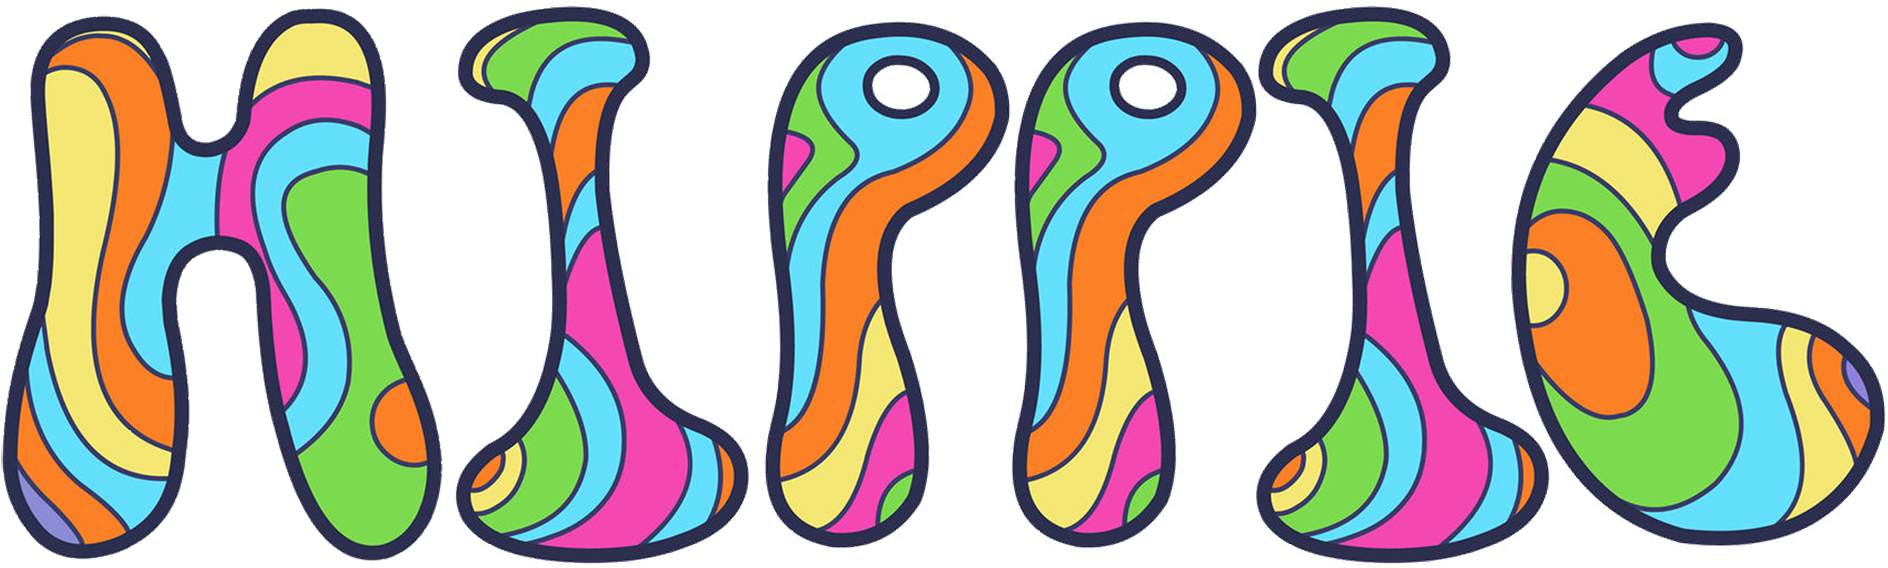 Psychedelic Letters (1920x698)